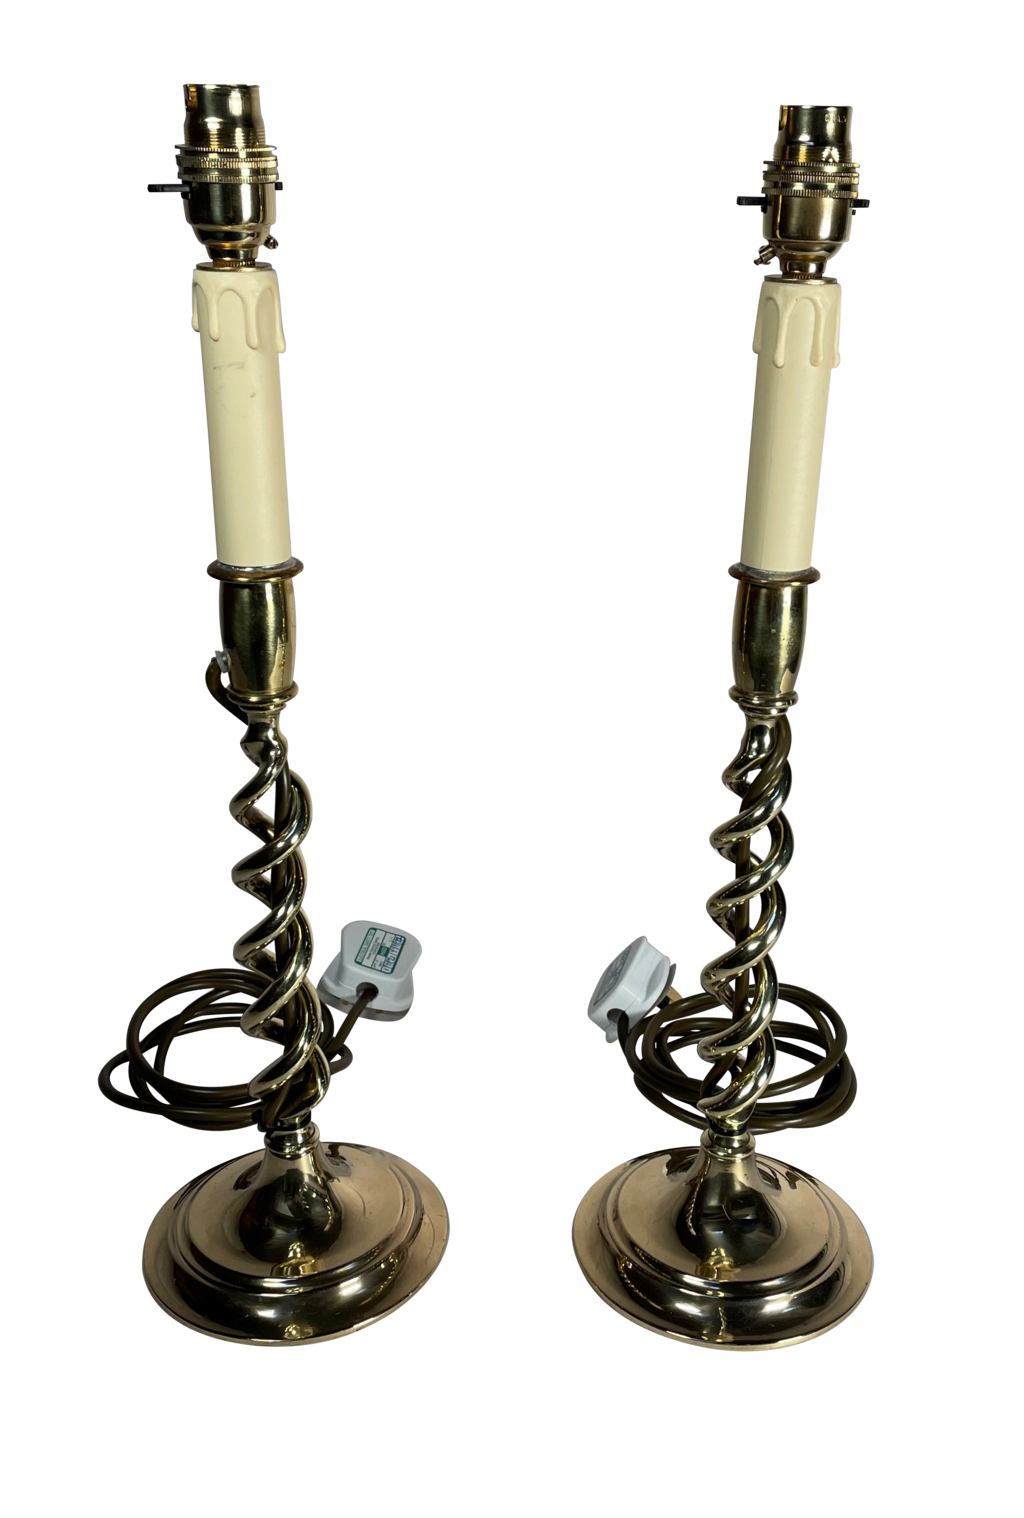 Pair of Brass Wrythen Twist Candlestick Table Lamps